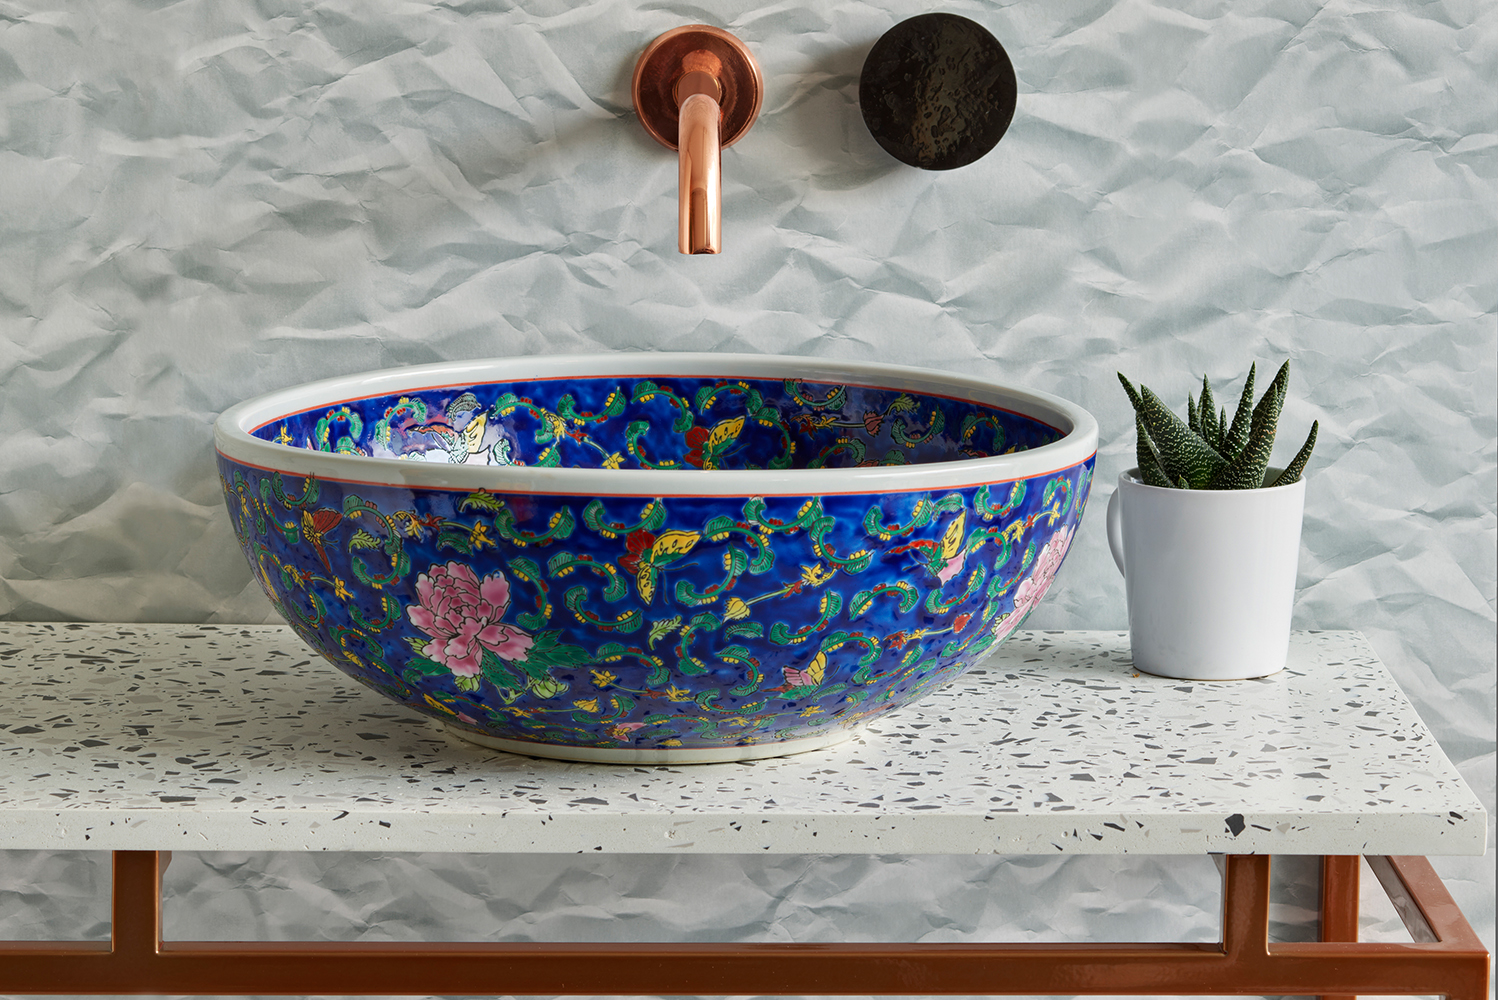 London Basin Company launched hand-decorated porcelain basins 